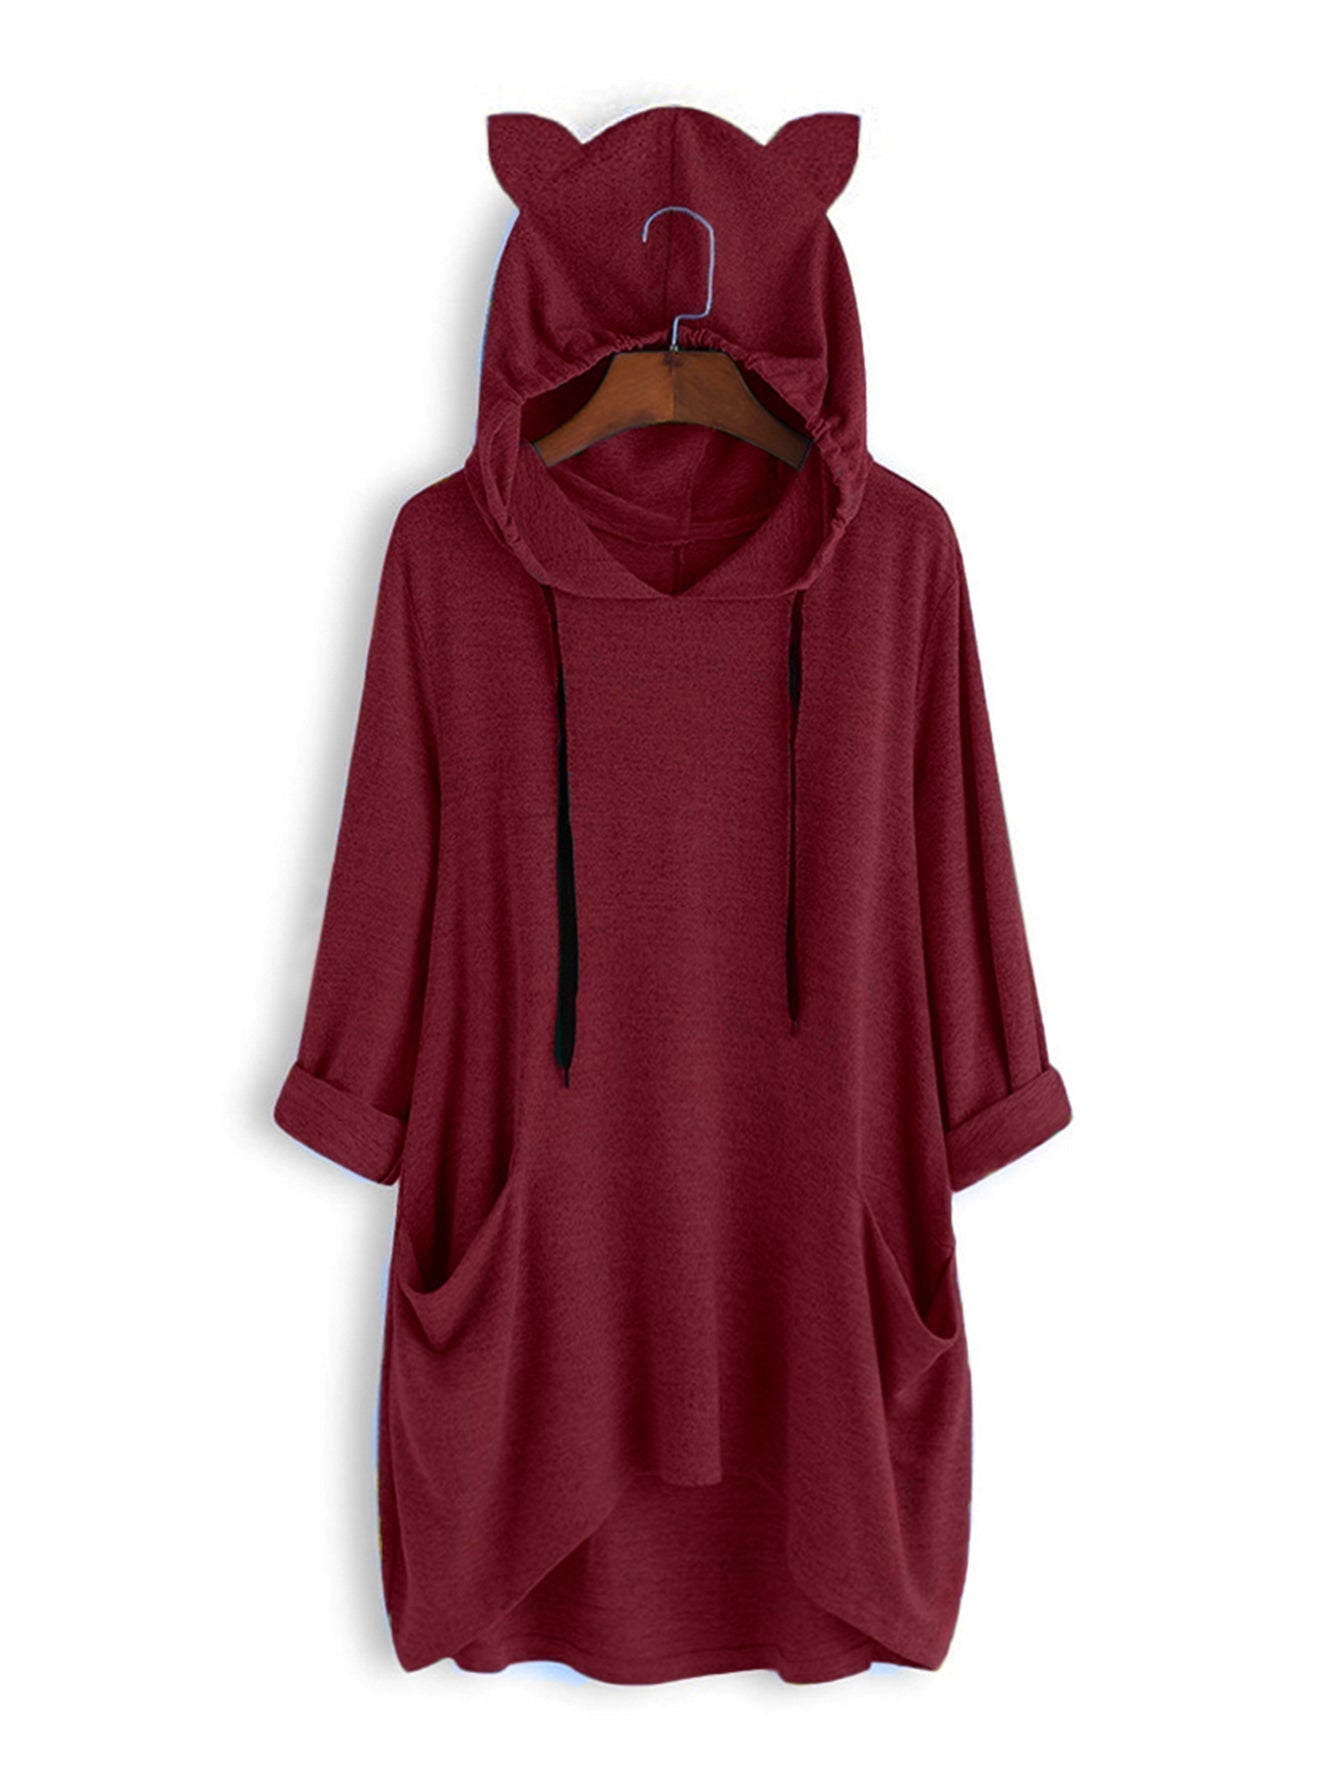 Three-quarter sleeve loose knit solid color Plus size casual coat hoodie Sai Feel